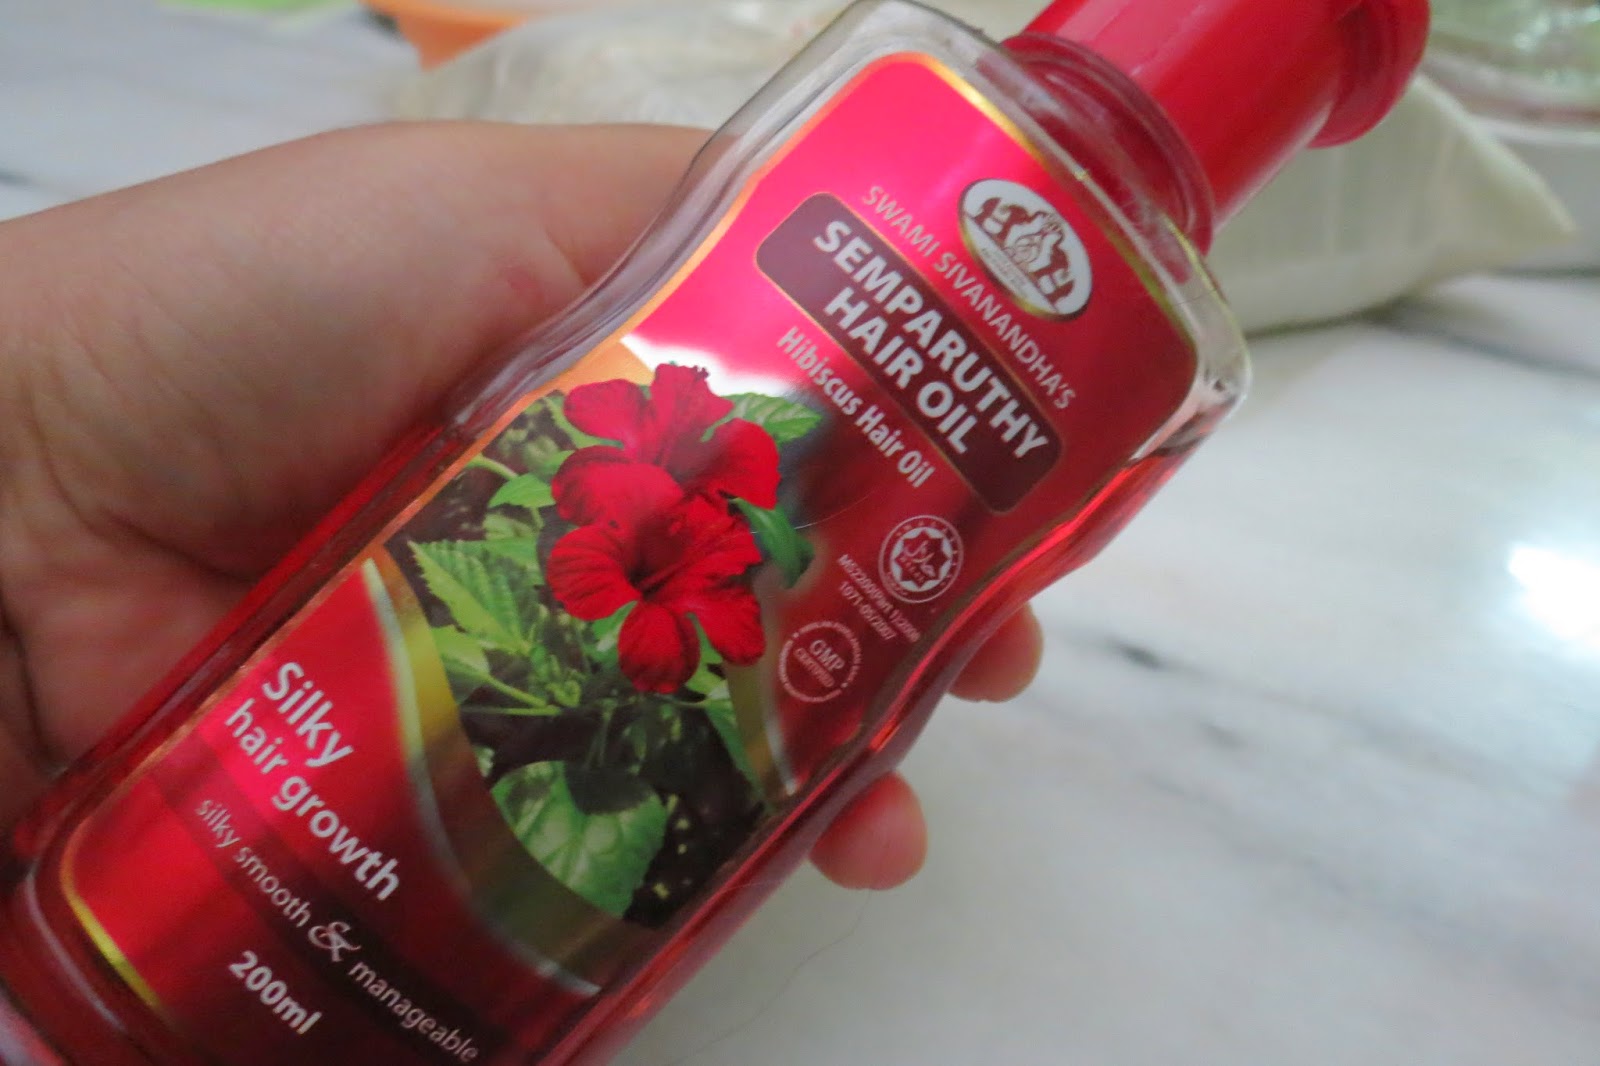 MY LIFE AS IT IS: Semparuthy Hair Oil